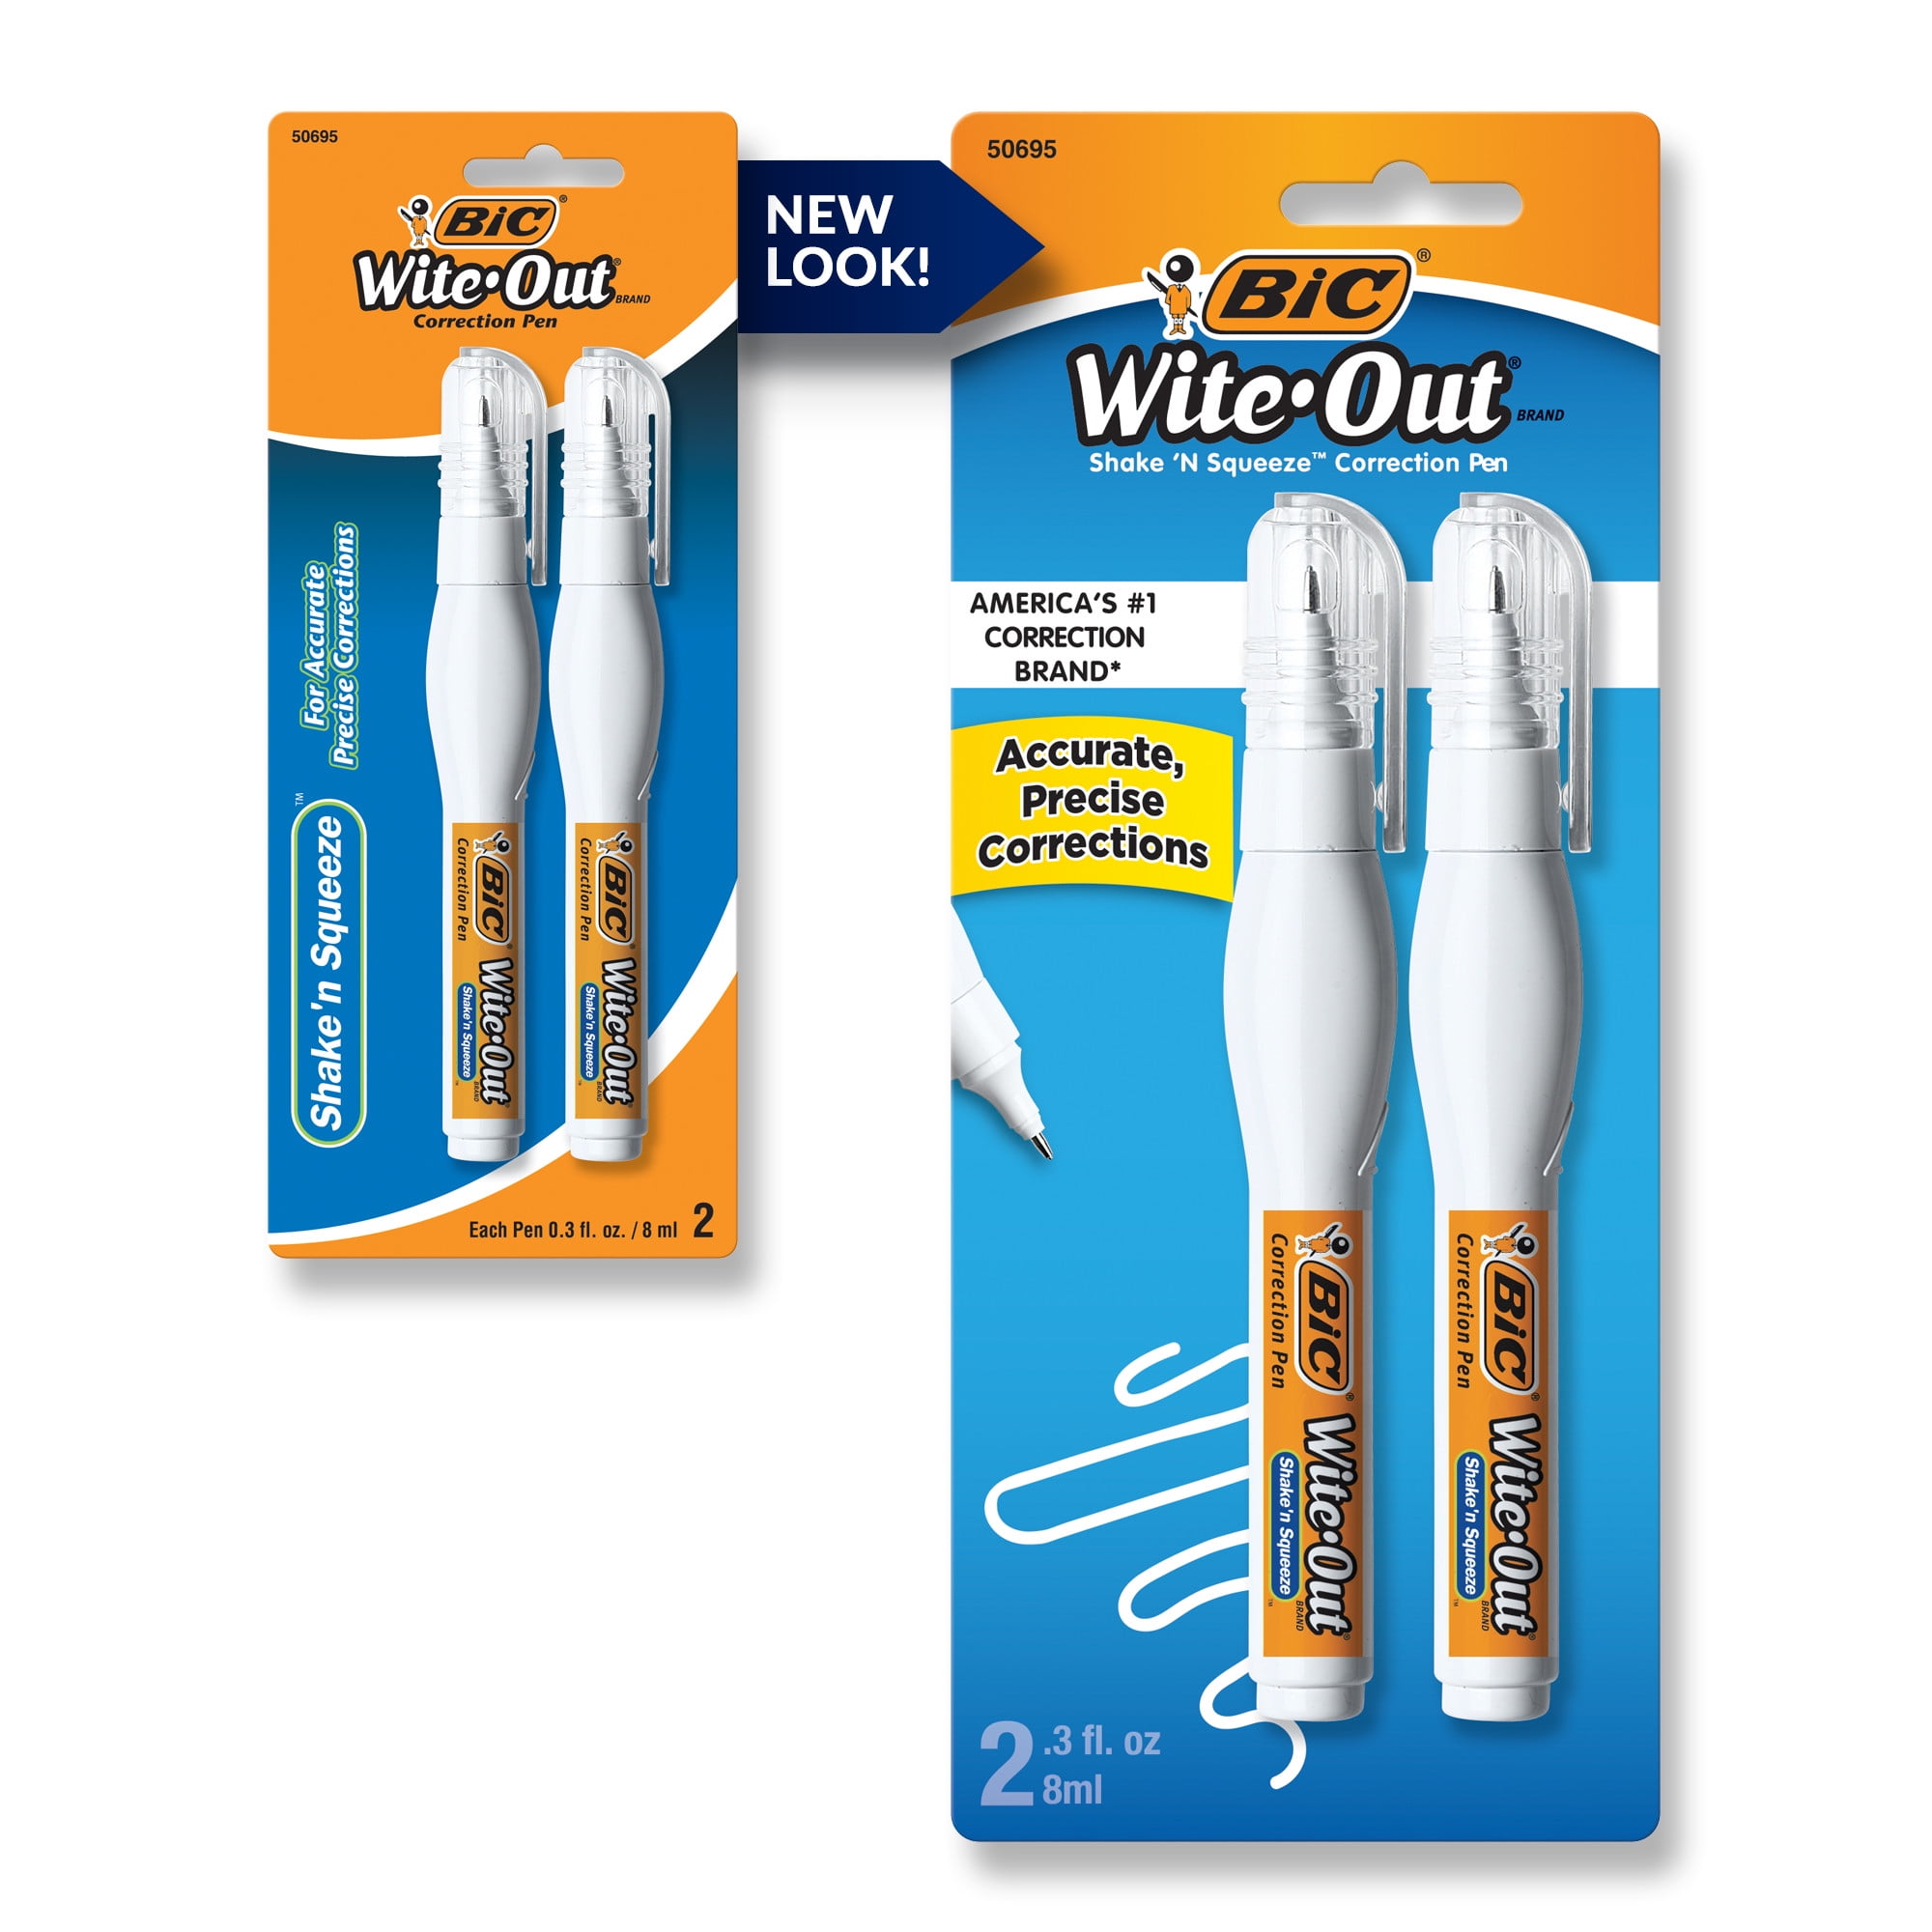 BIC WHITE OUT correction fluid quick dry foam brush .7 fl oz (6 Pack)